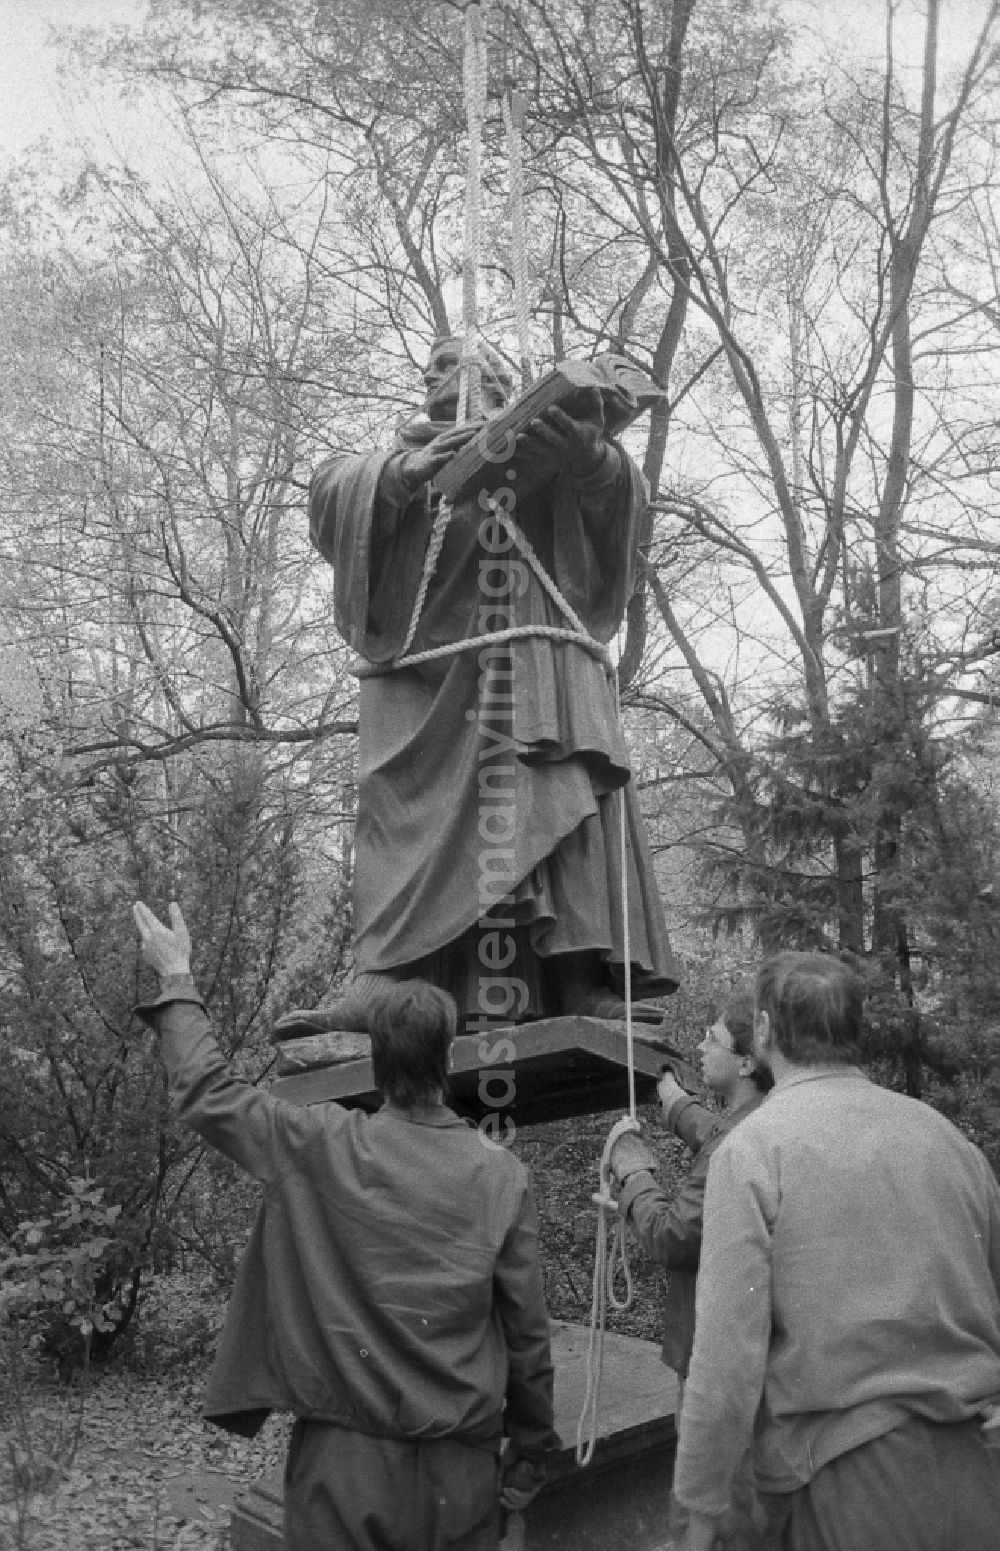 GDR photo archive: Berlin - Sculpture of the Martin Luther Monument during the re-erection on Karl-Liebknecht-Strasse in the Mitte district of East Berlin in the area of the former GDR, German Democratic Republic